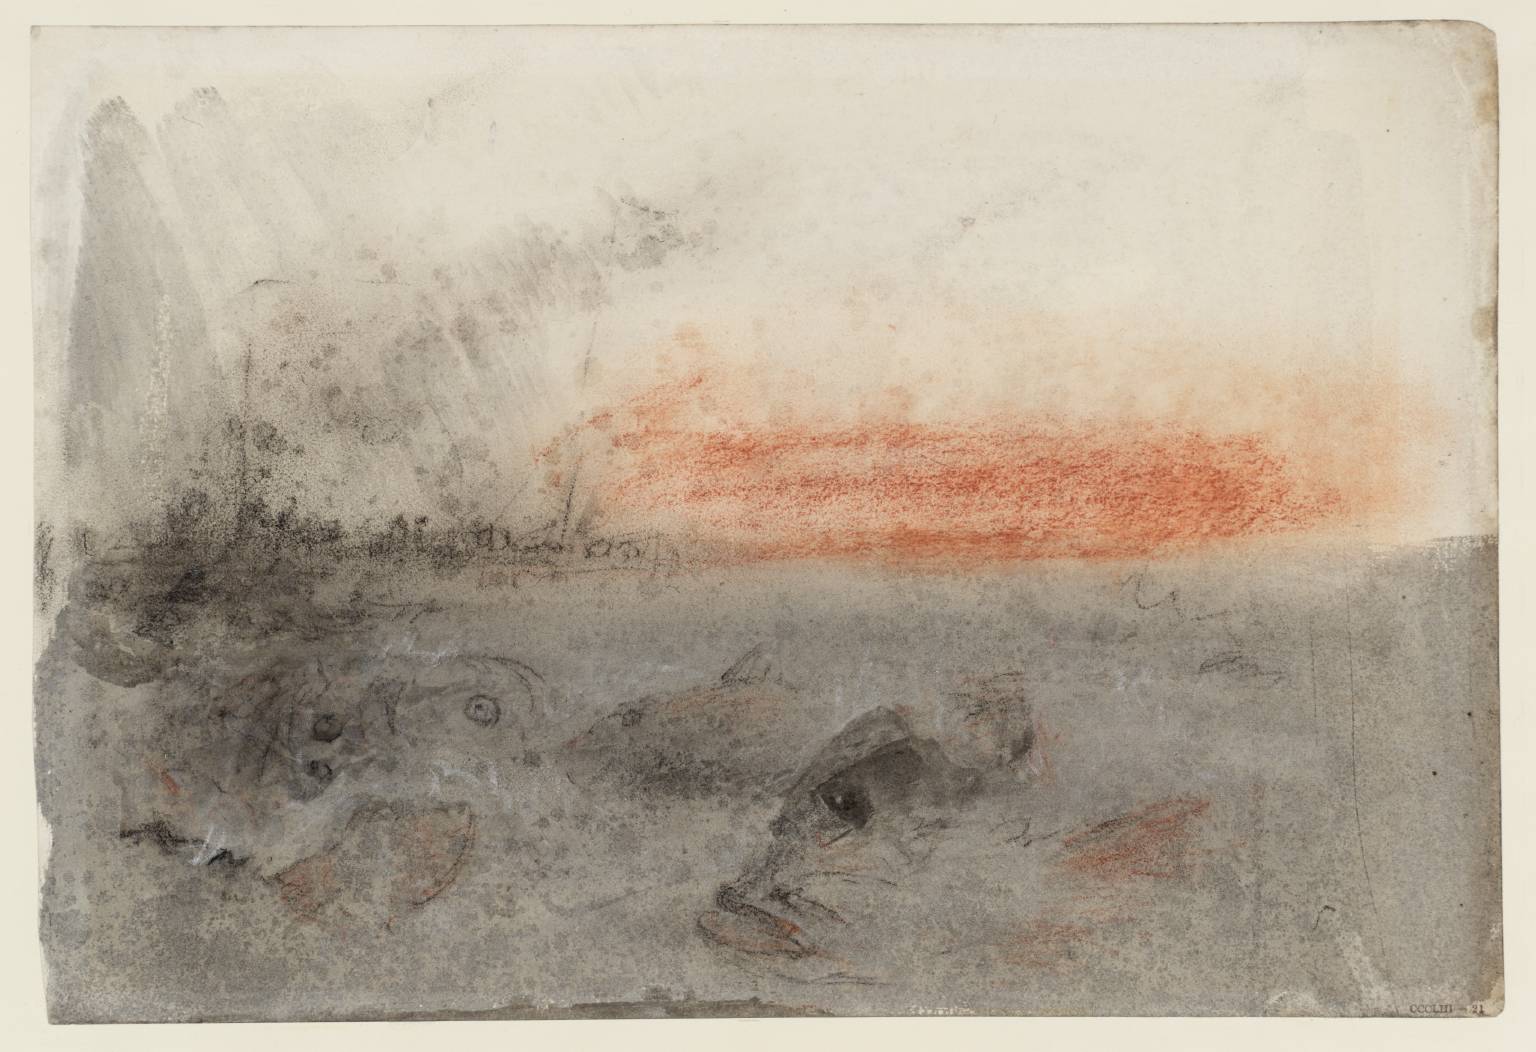 Sea Monsters and Vessels at Sunset', Joseph Mallord William Turner 